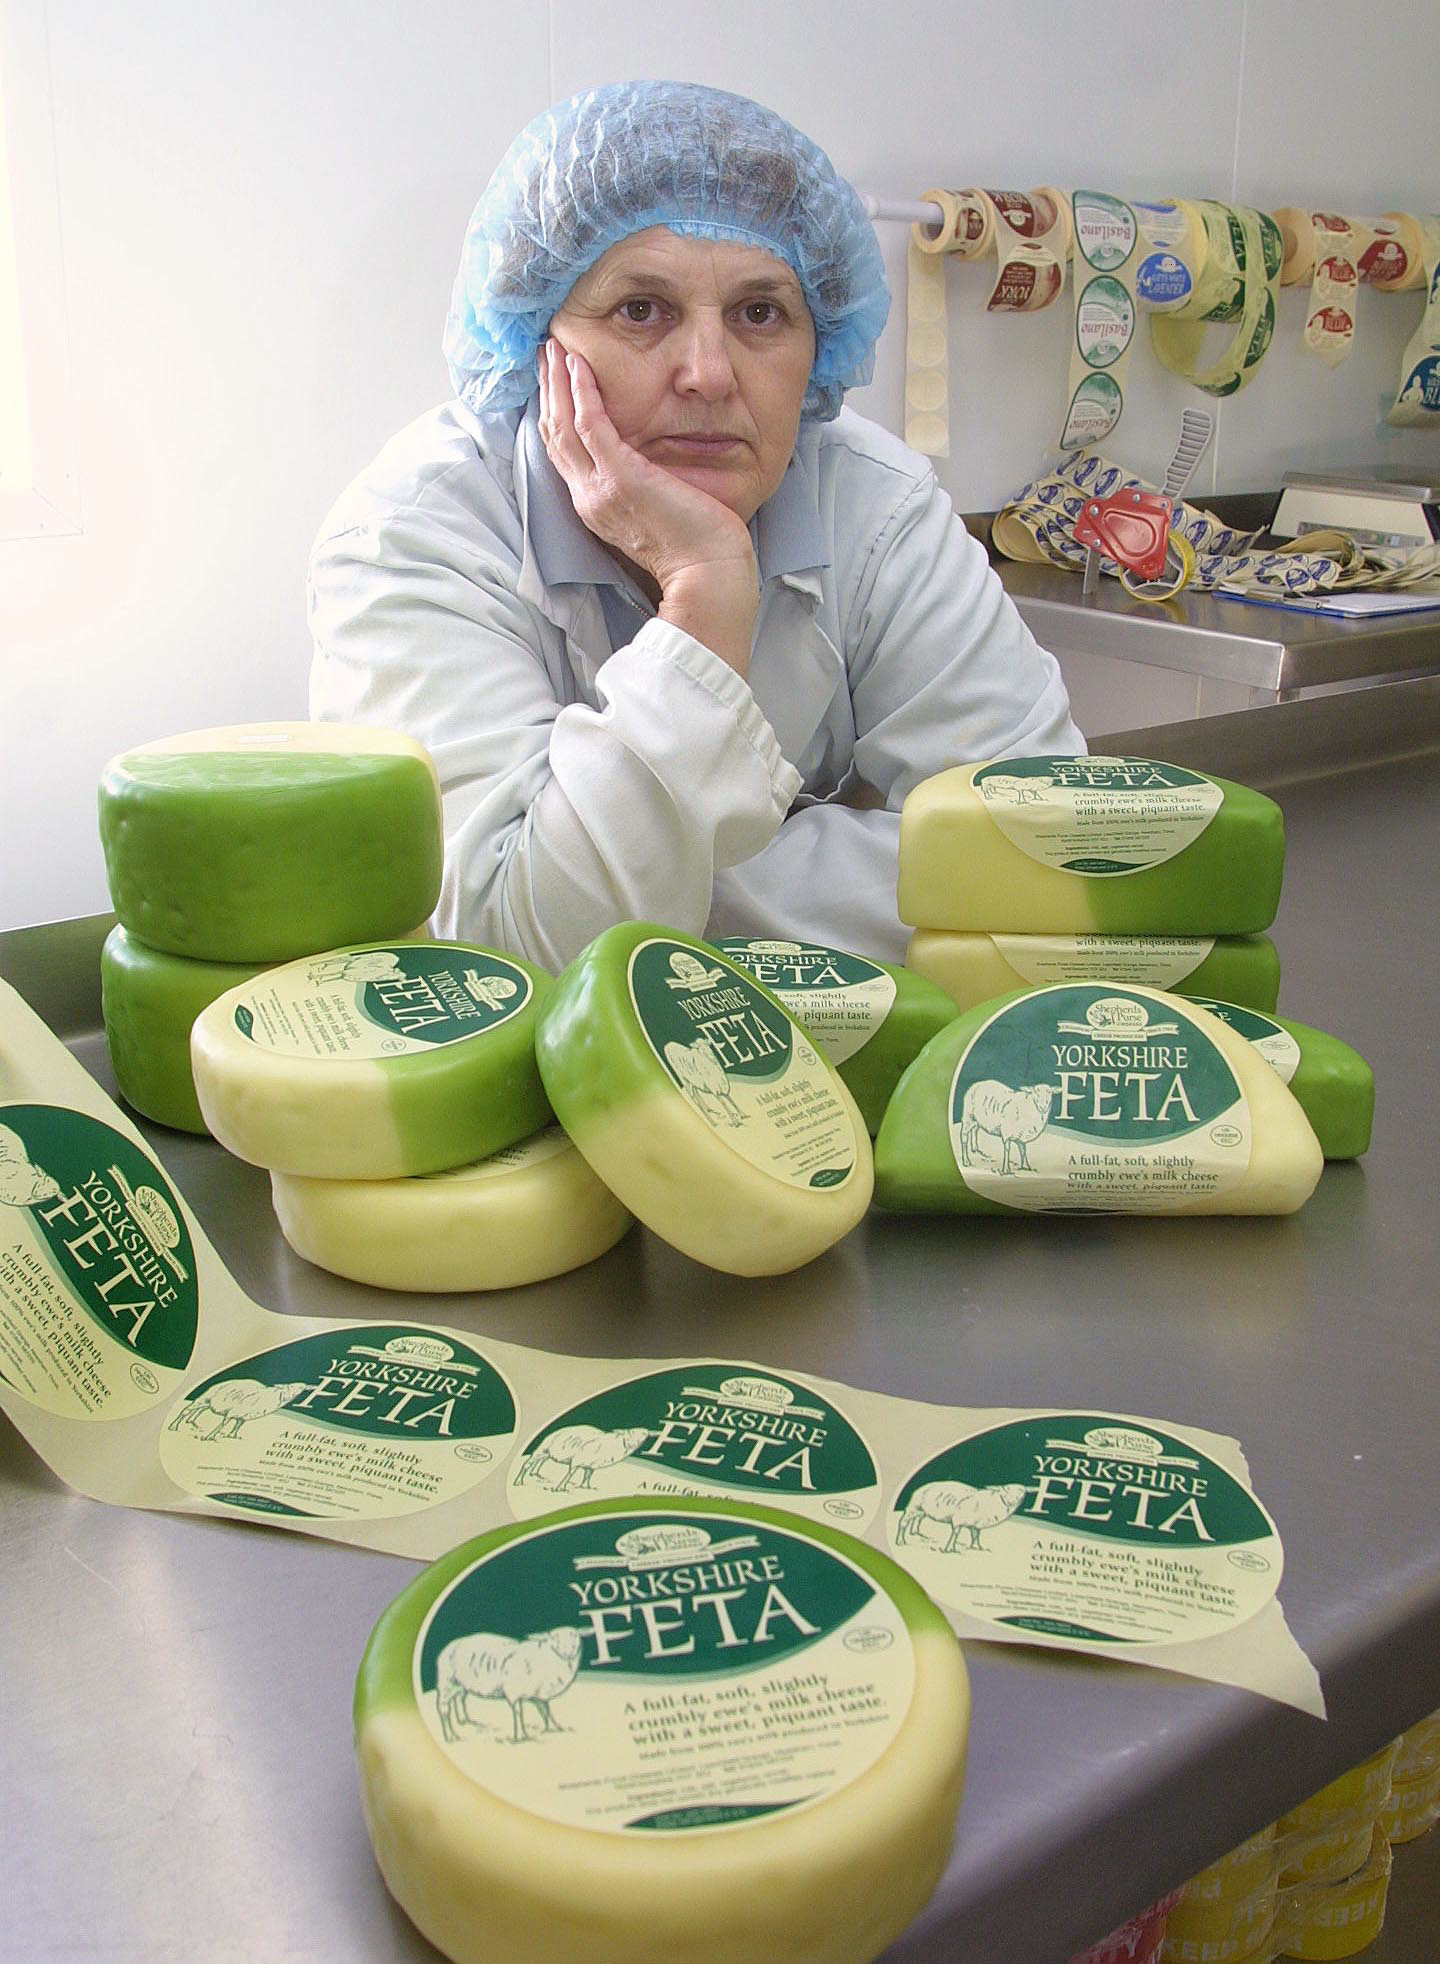 Judy Bell with some of her then-named Yorkshire Feta cheese in 2005